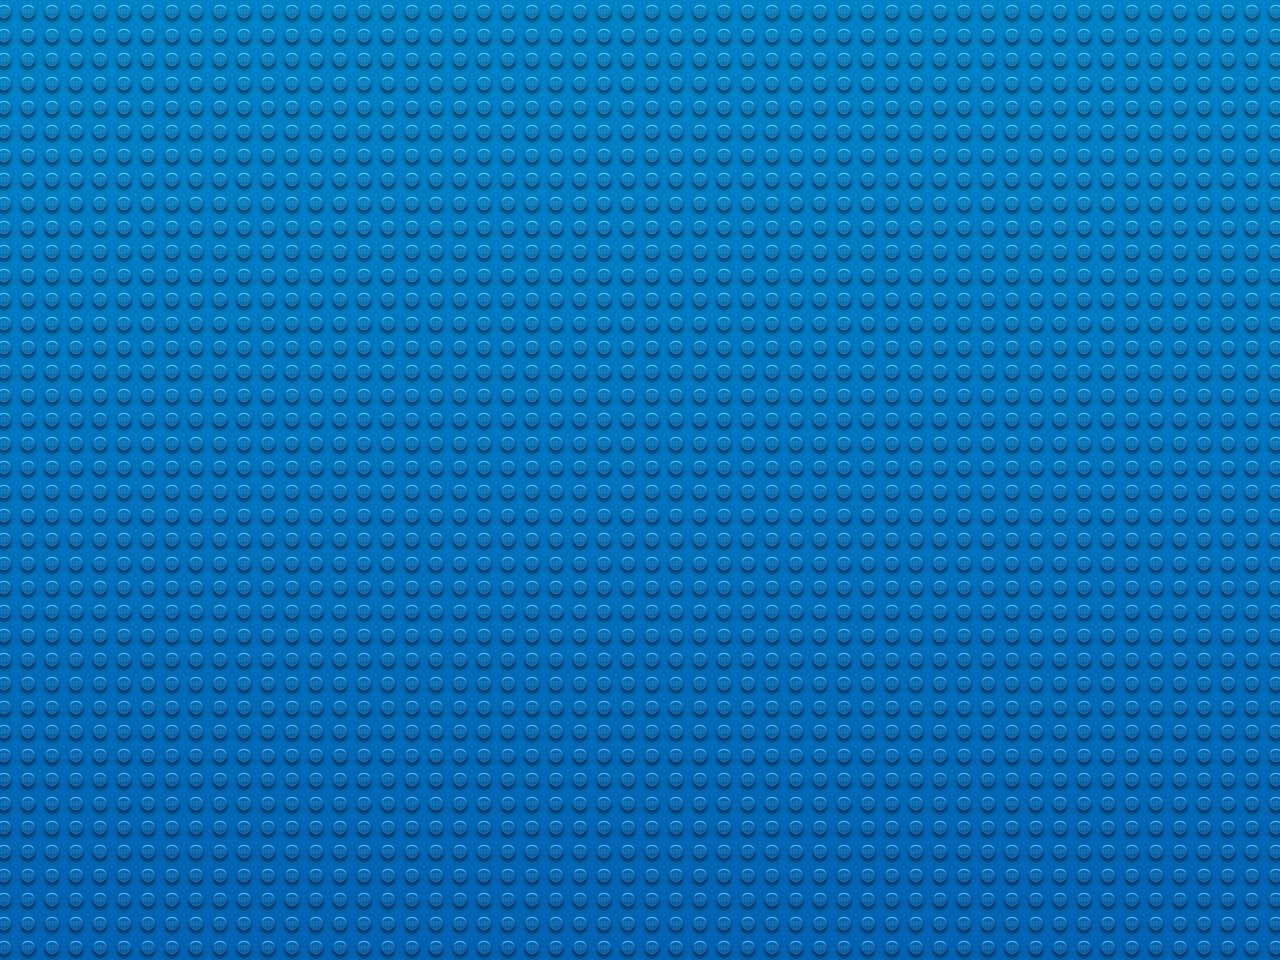 Lego Texture for 1280 x 960 resolution